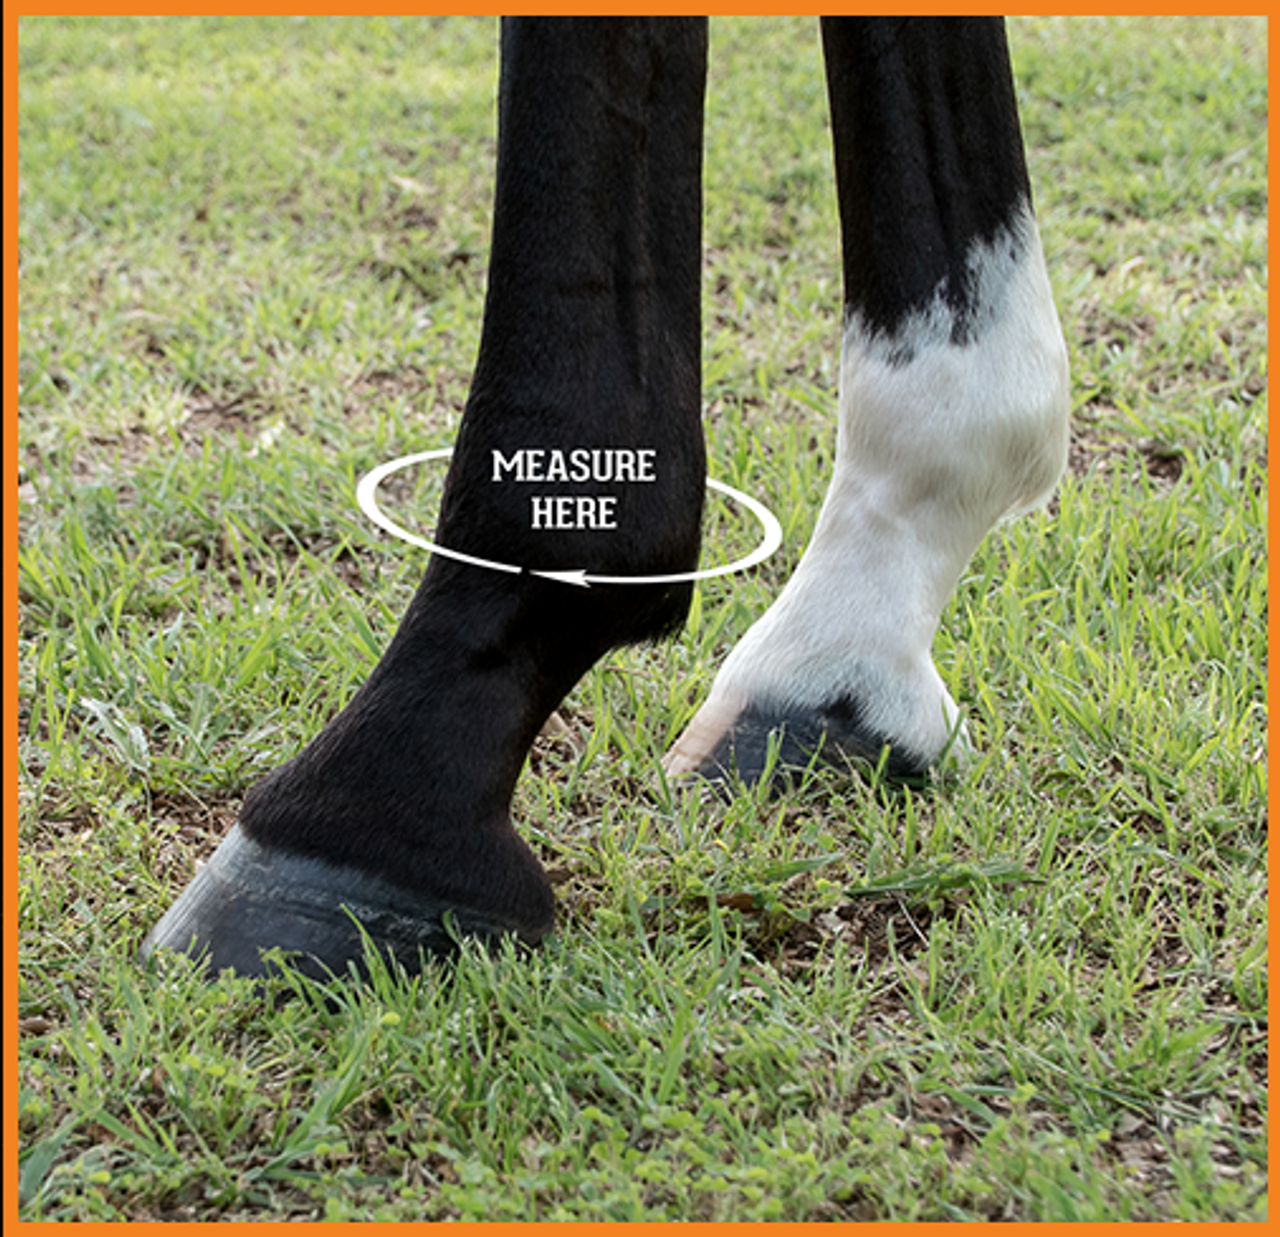 The sizing chart below is appropriate for all Iconoclast® Orthopedic and Rehabilitation Boots.

We recommend using a soft tape measure. If you do not have a soft tape measure you can use something like string, wrap it around the fetlock, mark where the end meets the rest of the string and then simply lay it flat next to a tape measure, ruler or yard stick to get your measurement.

Be sure to measure both the FRONT & BACK fetlocks as they are often different sizes. Customers regularly order boots in one size for the front legs and a different size for the hind legs.